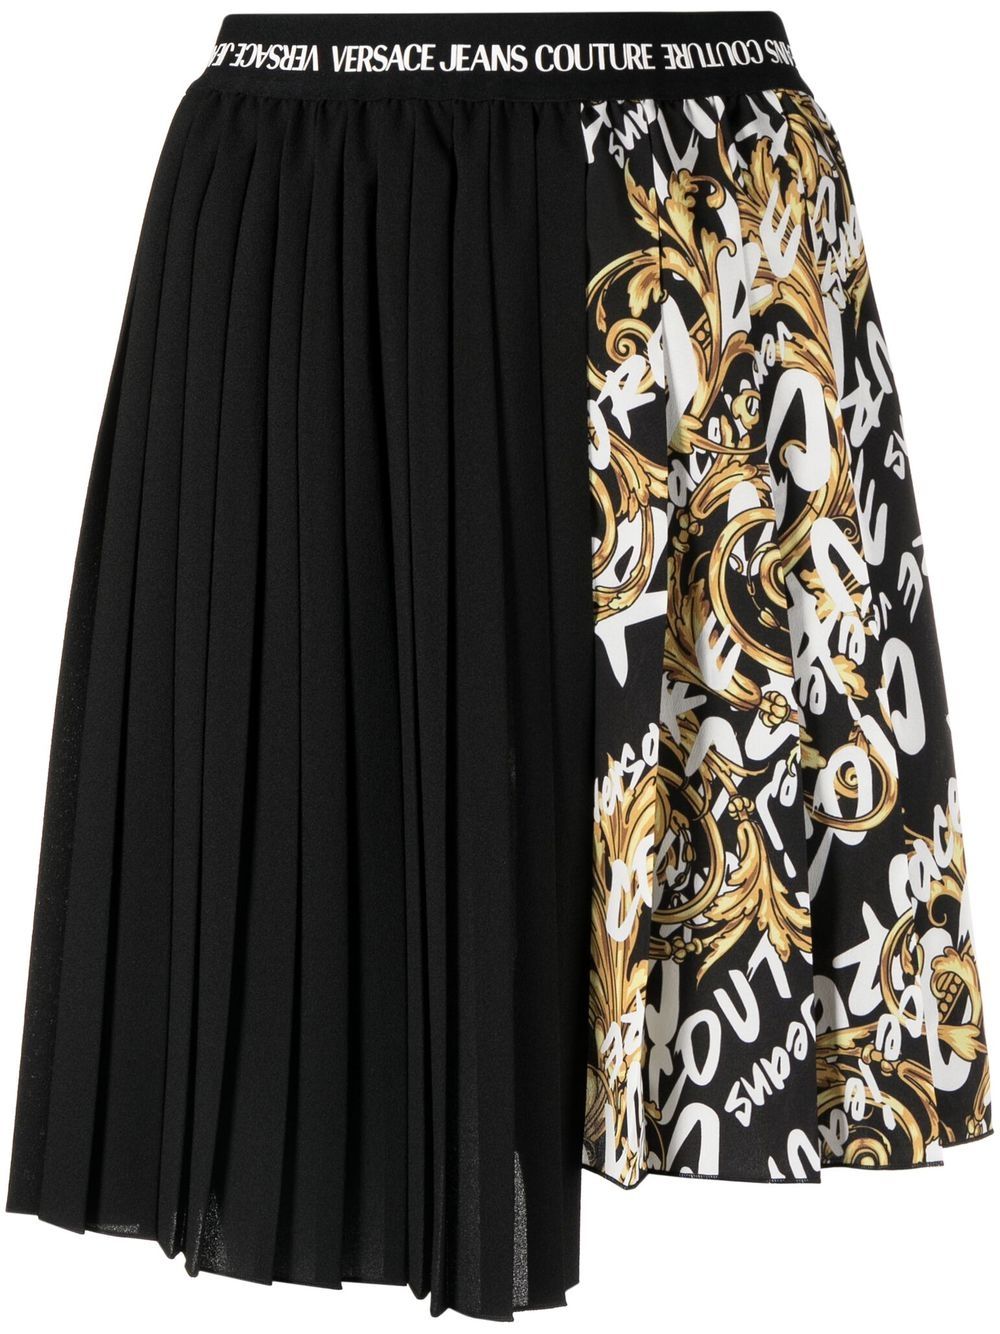 VERSACE JEANS COUTURE LOGO BRUSH PLEATED SKIRT